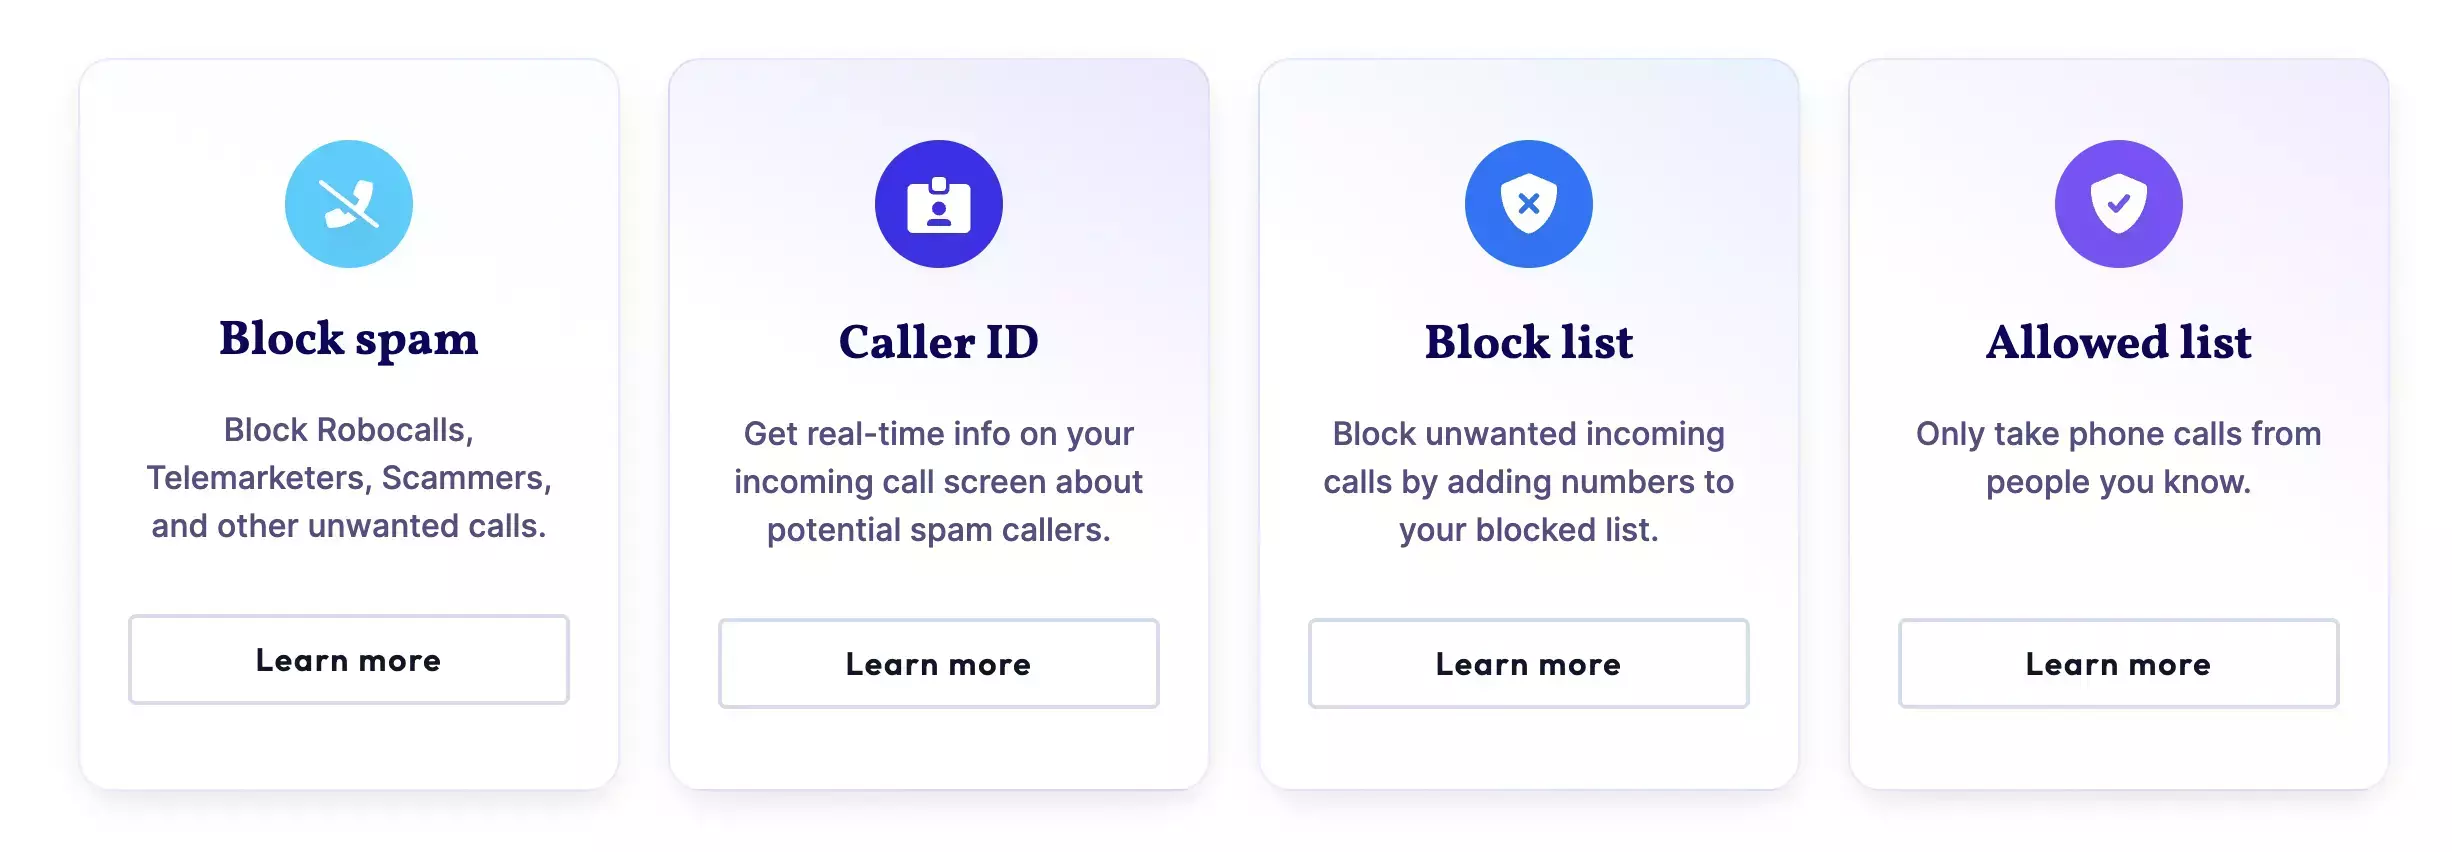 An image showing Community Phone spam blocker features